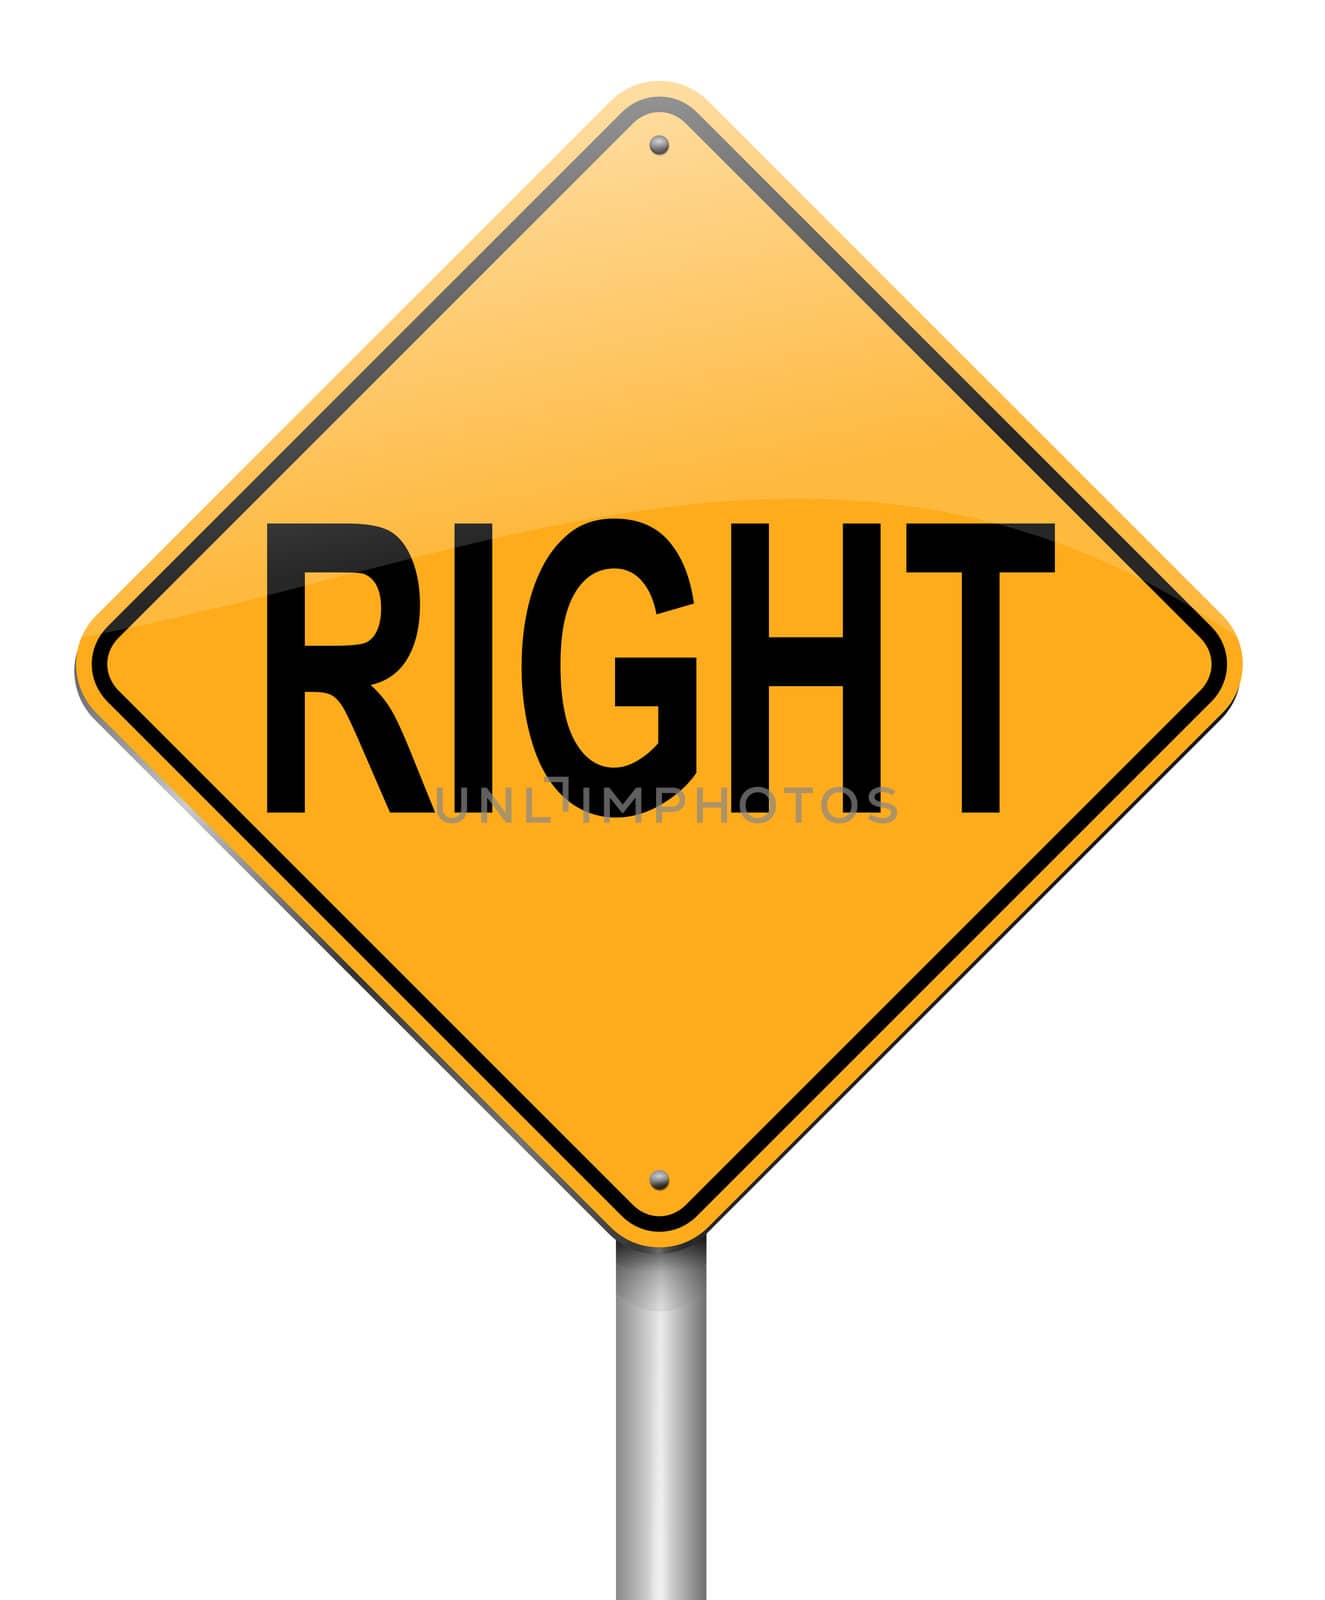 Illustration depicting a roadsign with a right concept. White background.